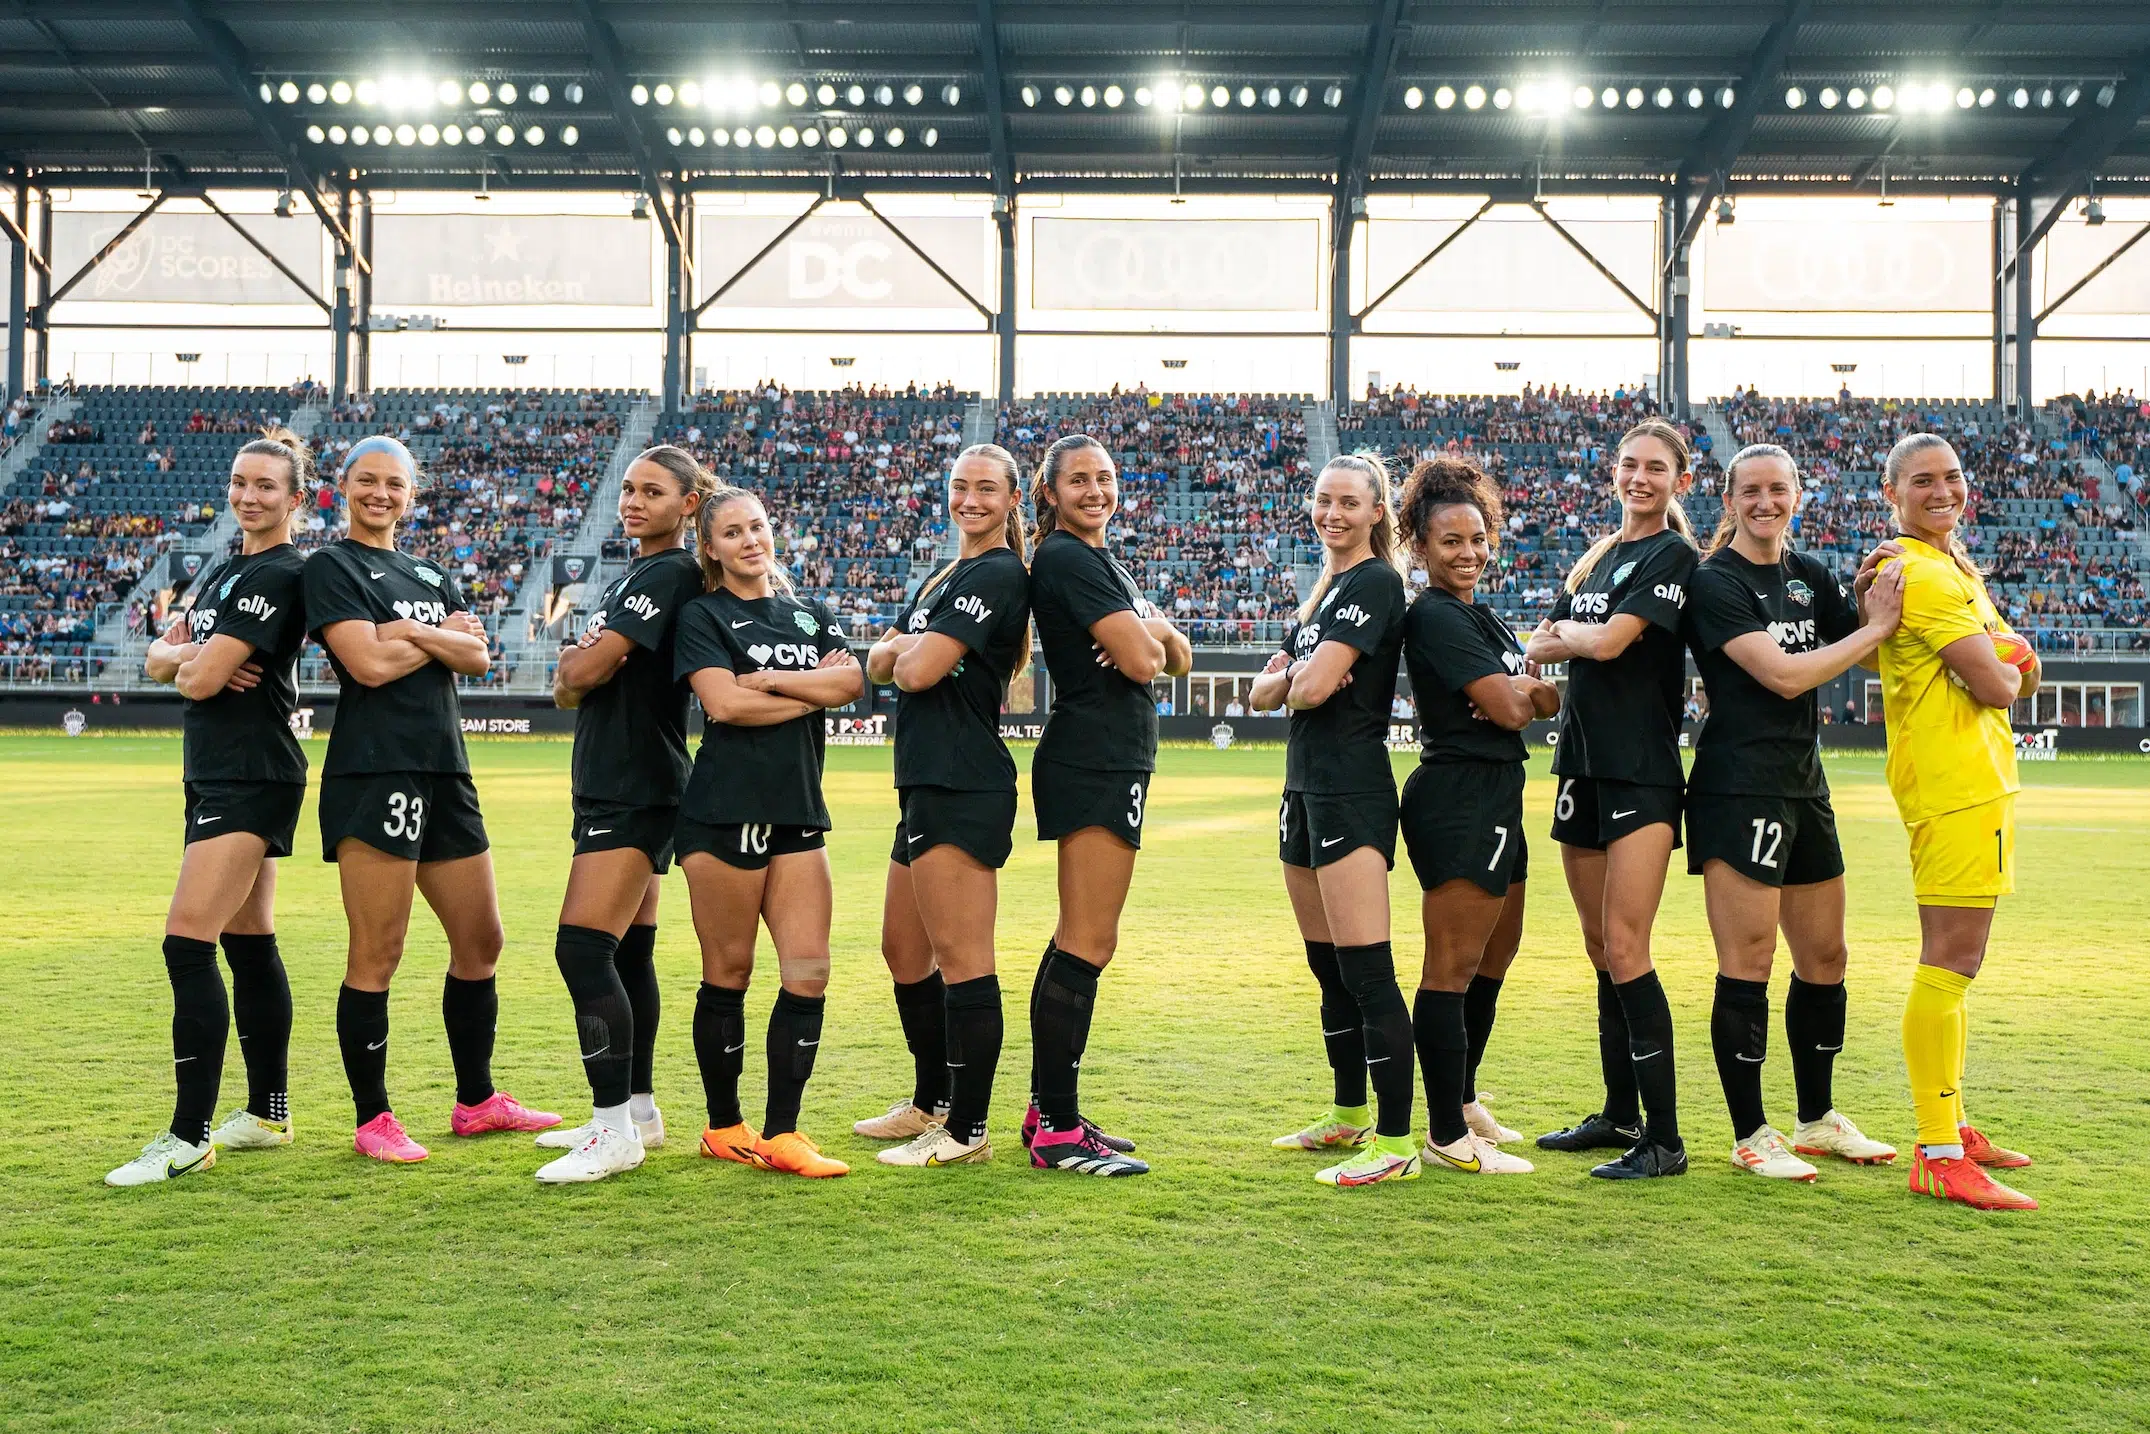 In pairs of two and three, the starting lineup for the Washington Spirit wear all black and pose back to back.